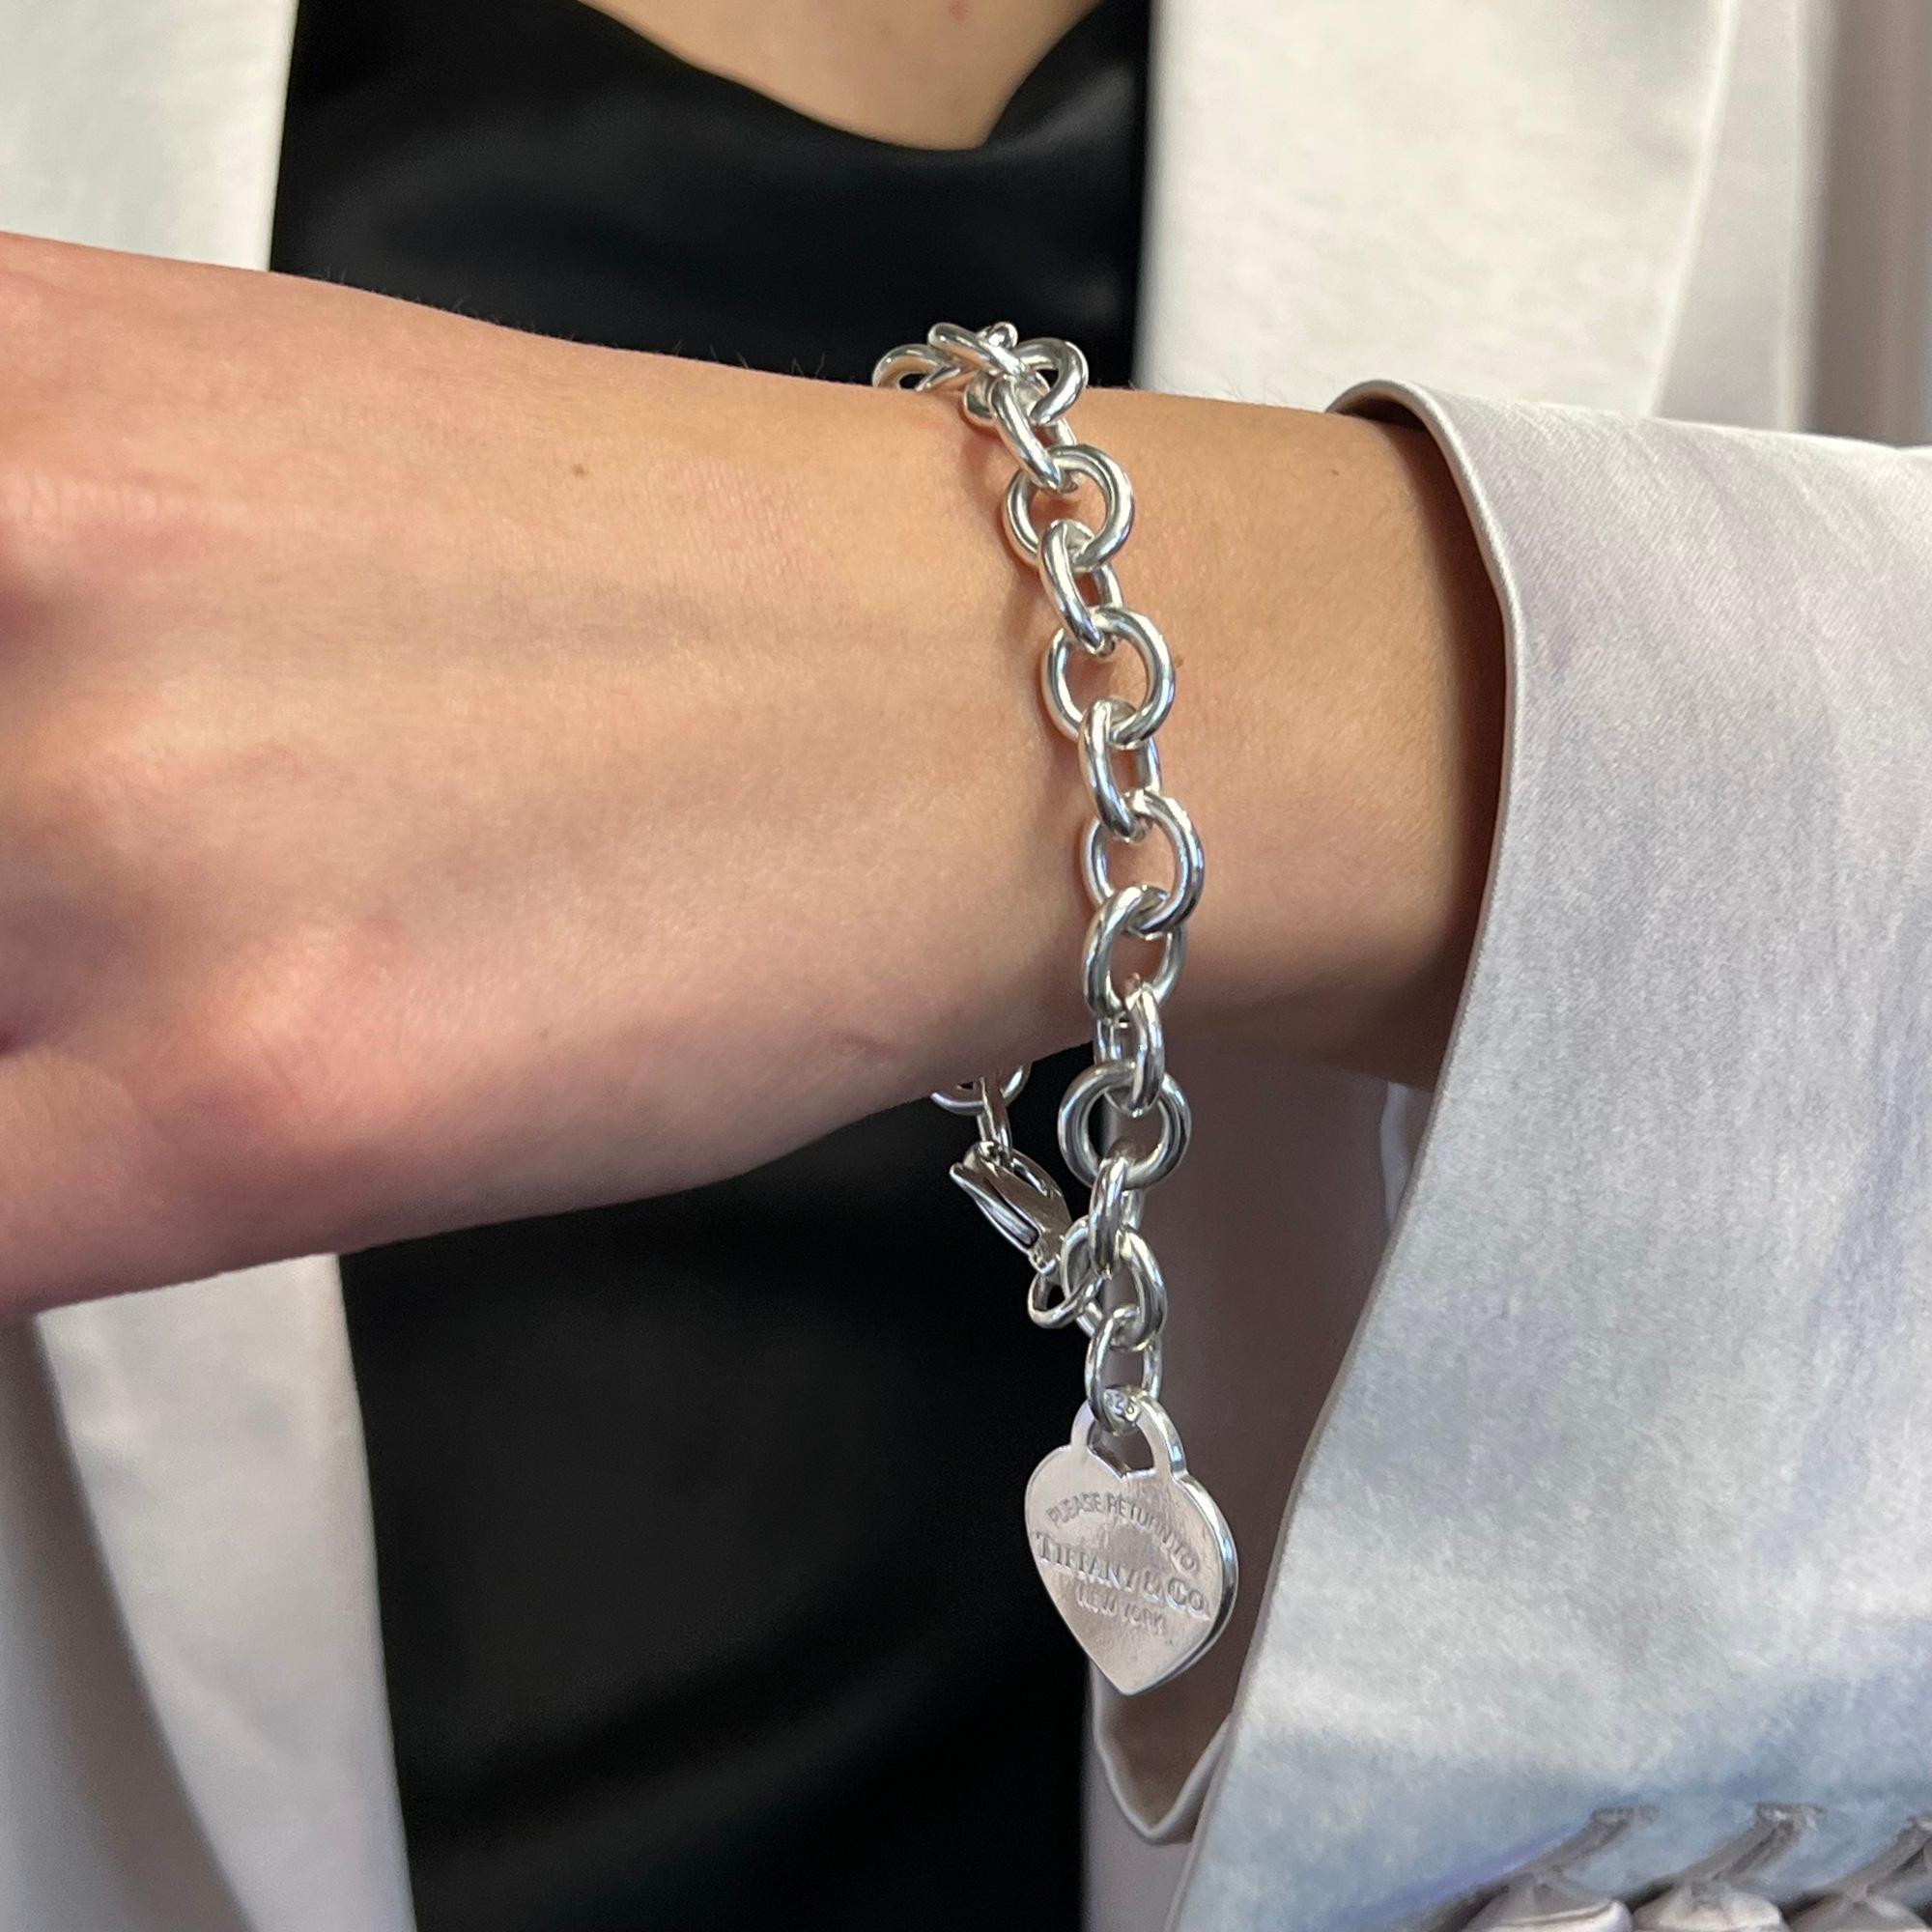 With a truly elegant design, this bracelet embodies the collection's celebrated aesthetic. Designed in sterling silver 925. This corner hanging heart tag charm comes with engraving on the front and stamped on the back. Secured with lobster lock